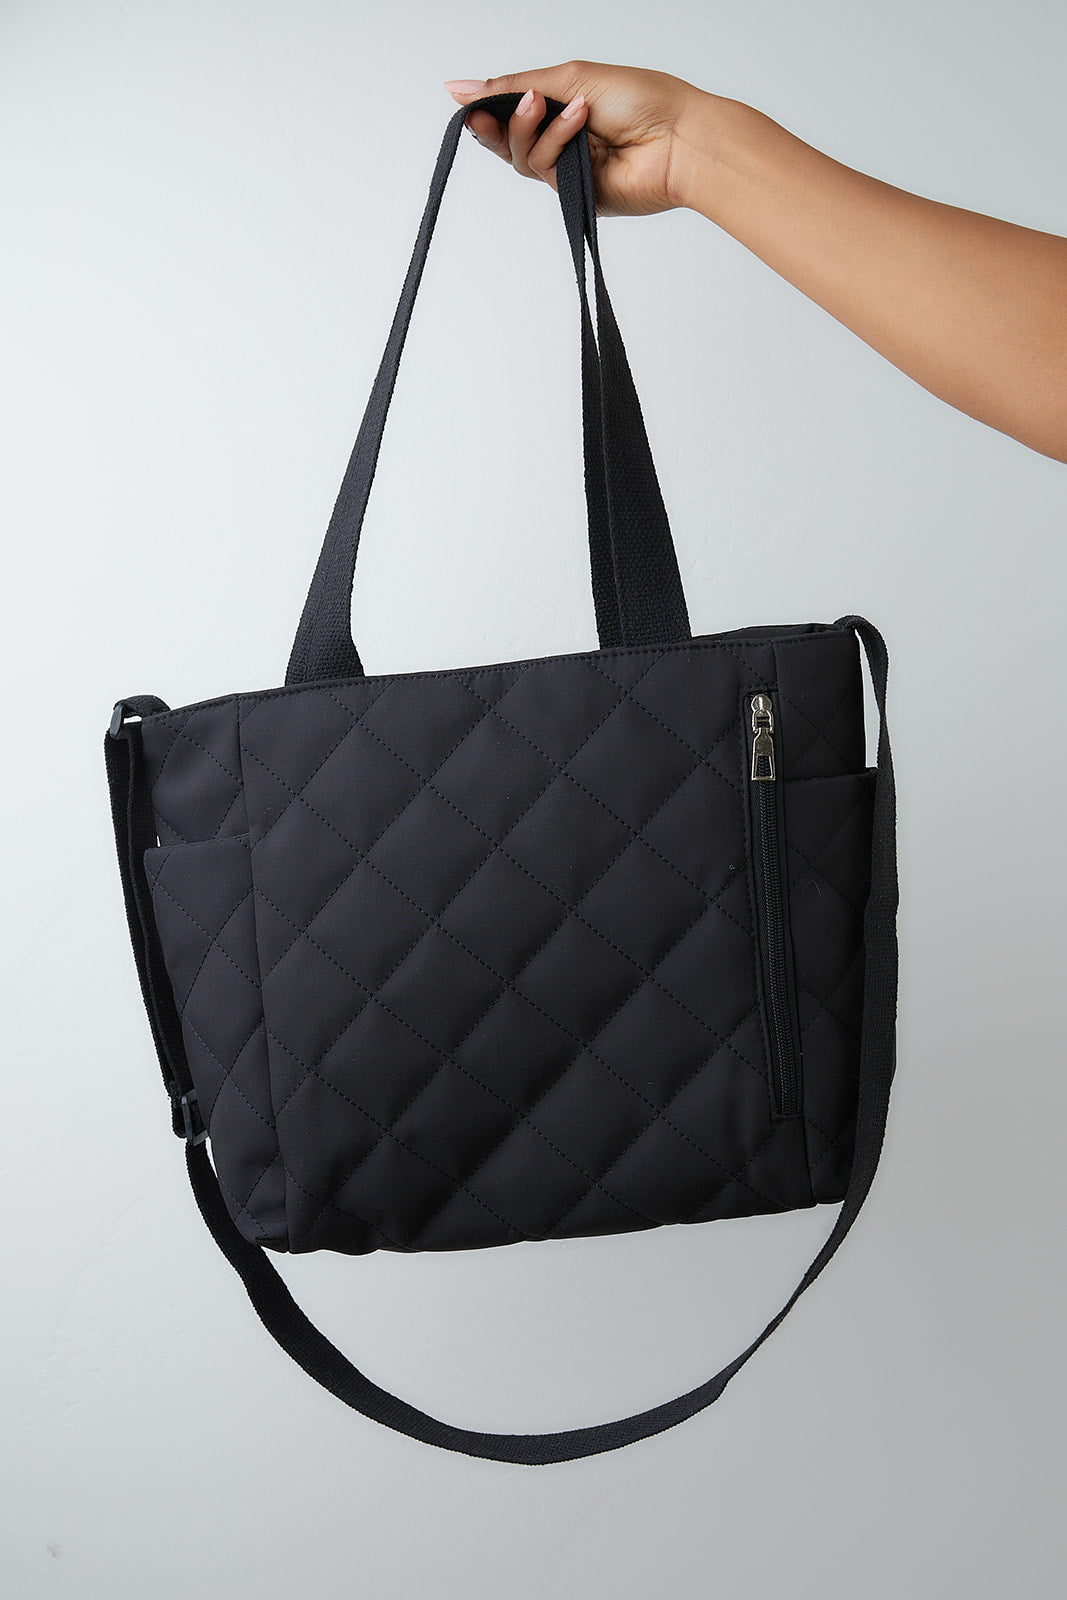 There She Goes Bag in Black - 5/15/2023